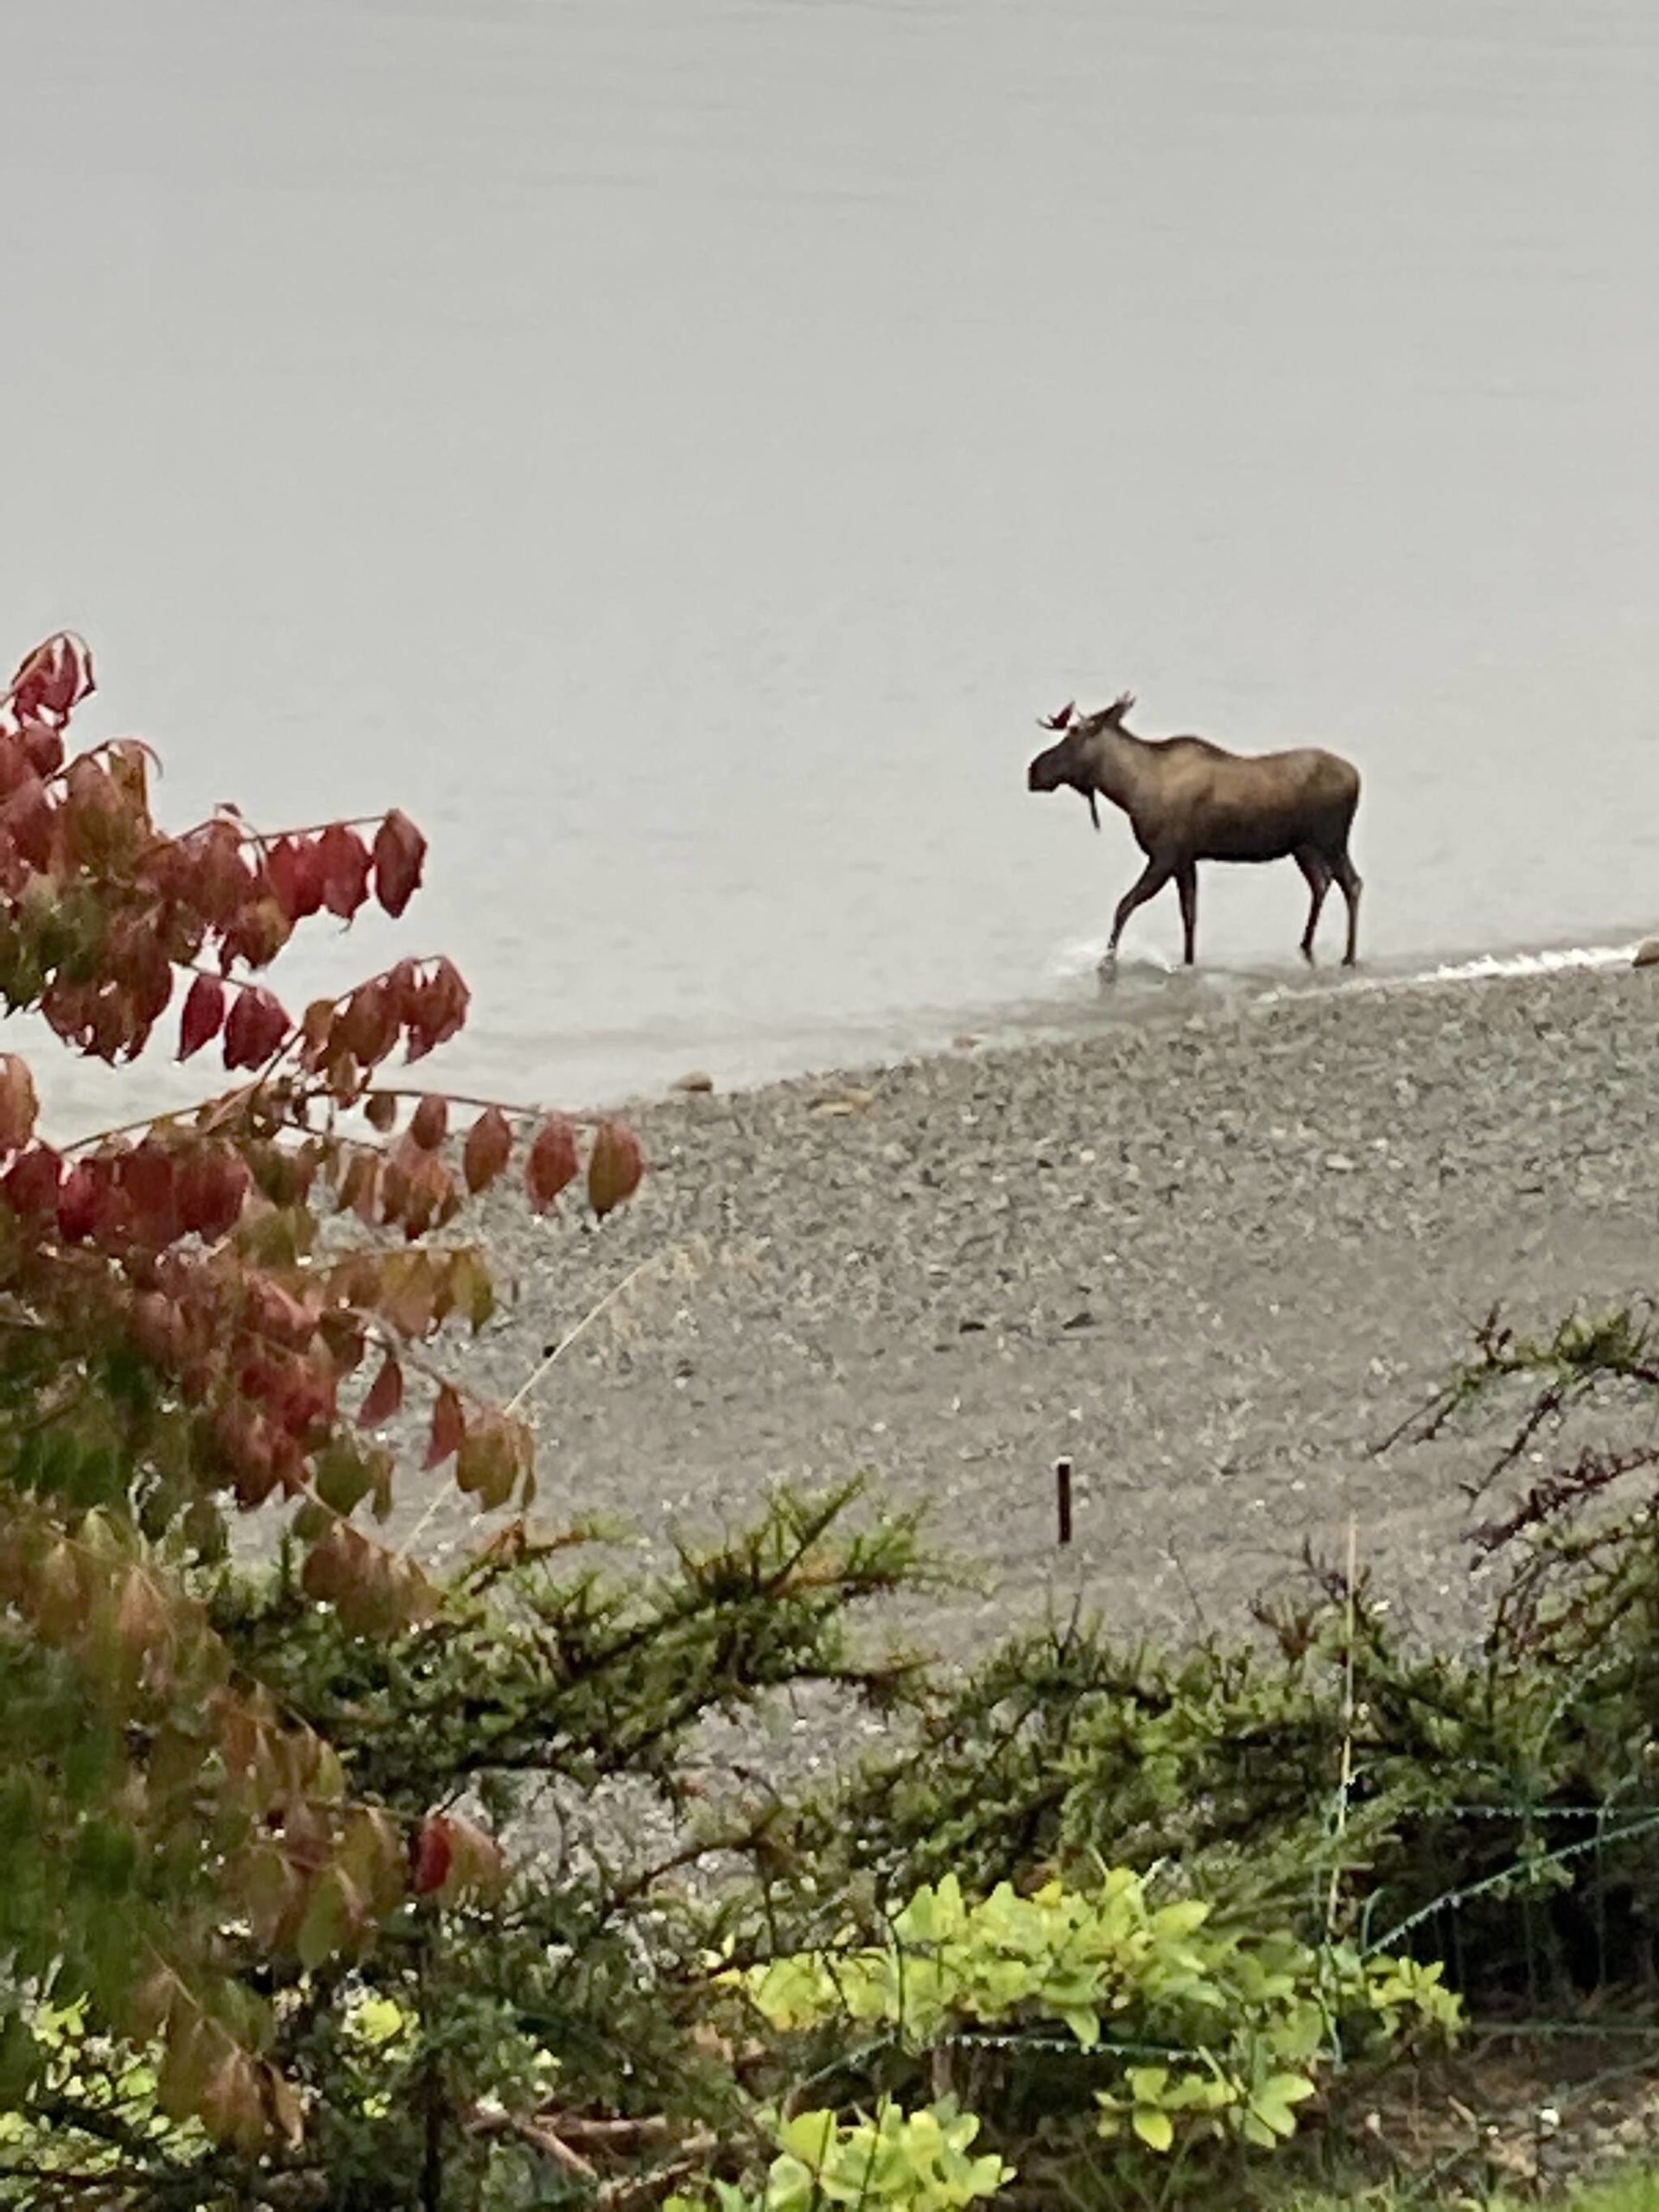 Quite common throughout the Pacific Northwest, moose aren’t often seen in the Juneau area, which is why Lena Point residents were surprised to see one on the beach the morning of Friday, Sept. 17, 2021. (Courtesy photo/ Matt Musslewhite)